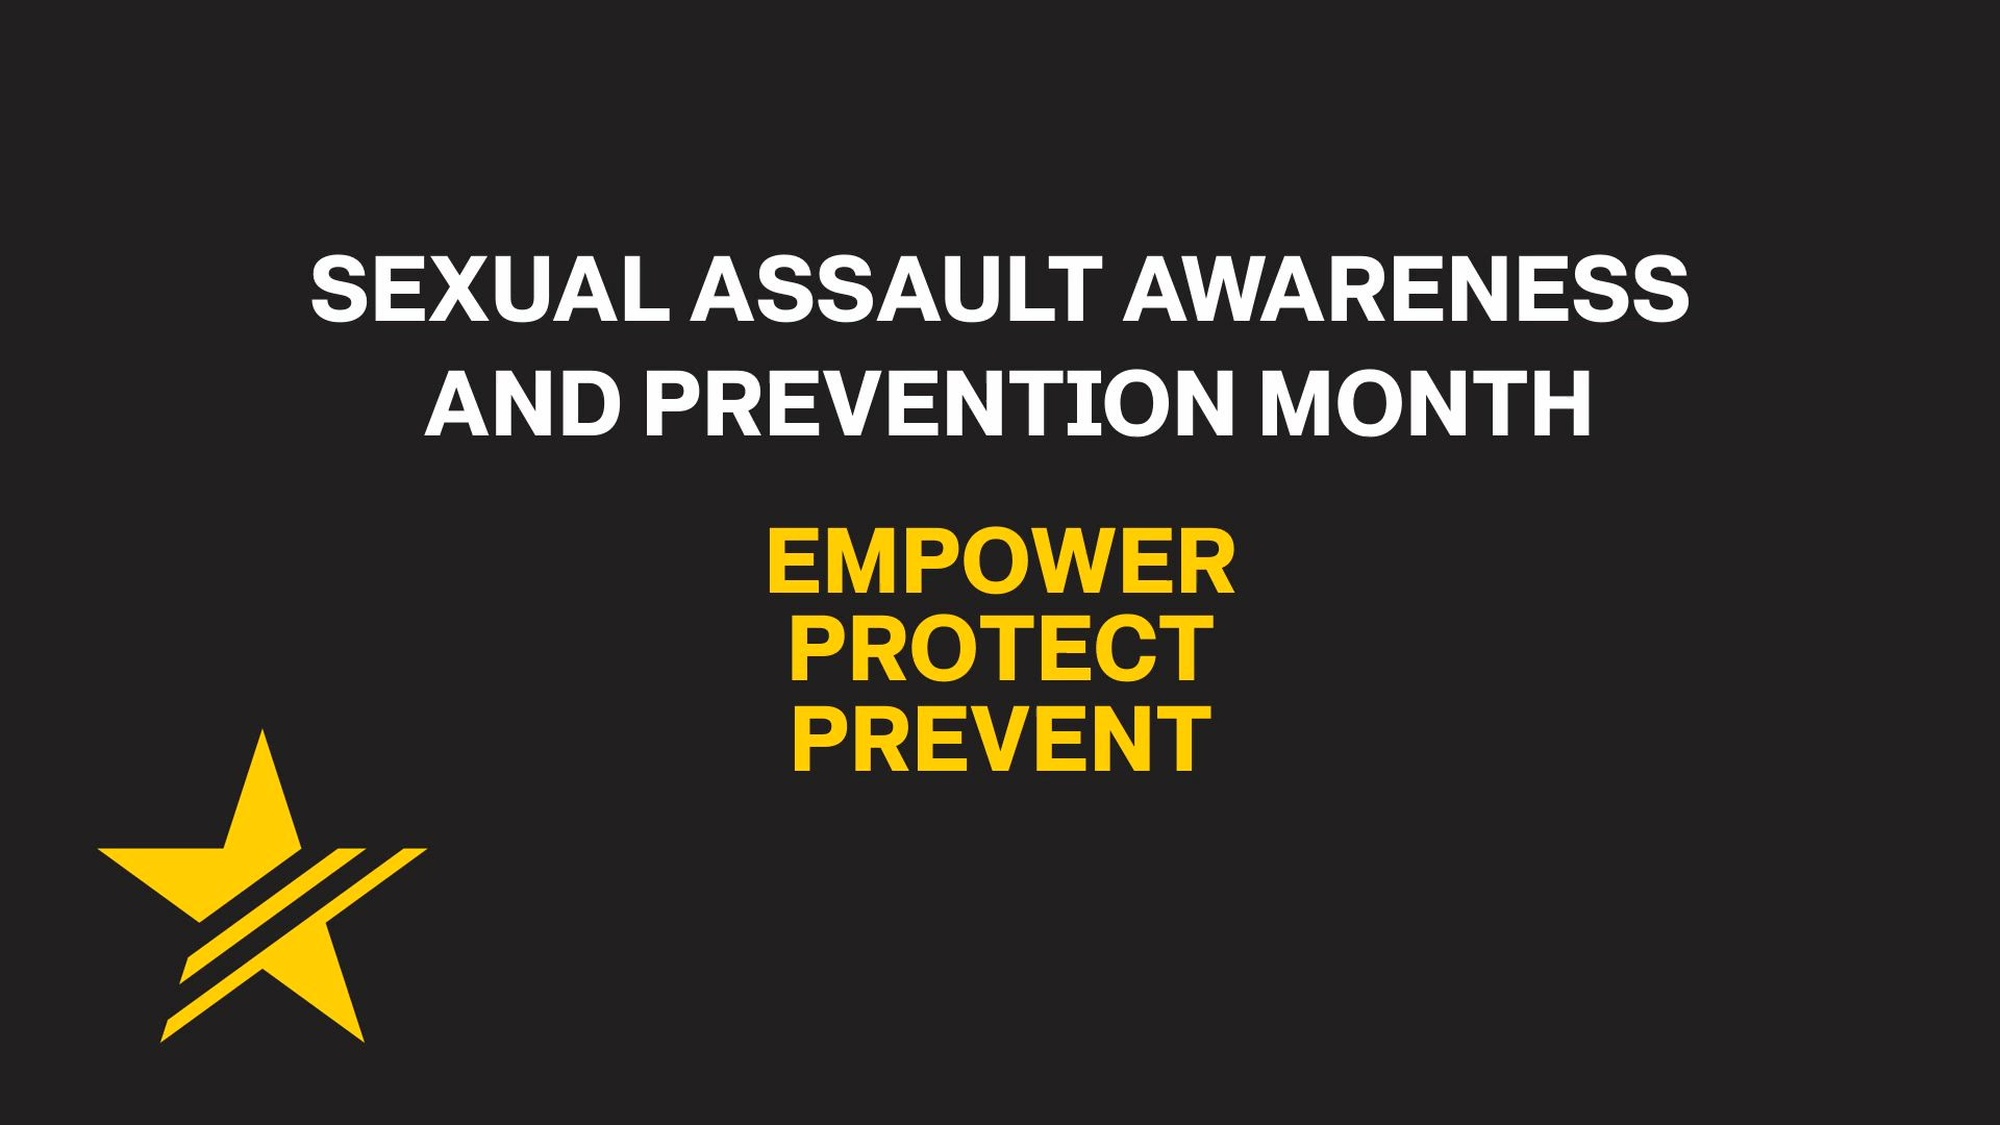 "Change Through Unity: Empower. Protect. Prevent." This is the unified message from Lt. Gen. Jody Daniels, Chief of Army Reserve and Commanding General, Maj. Gen. Gene J. LeBeouf, Deputy Commanding General for Army Reserve, and Command Sgt. Major Andrew Lombardo, Command Sergeant Major for the Army Reserve. April is Sexual Assault Awareness and Prevention Month (SAAPM), and senior leaders are dedicated to highlighting the power of acts that can bolster prevention, increase reporting, and promote advocacy for a safer U.S. Army Reserve. "We are committed now, and always, to ensuring that our Army Reserve Soldiers are able to serve their country in an environment that is fully aligned with all Army values."